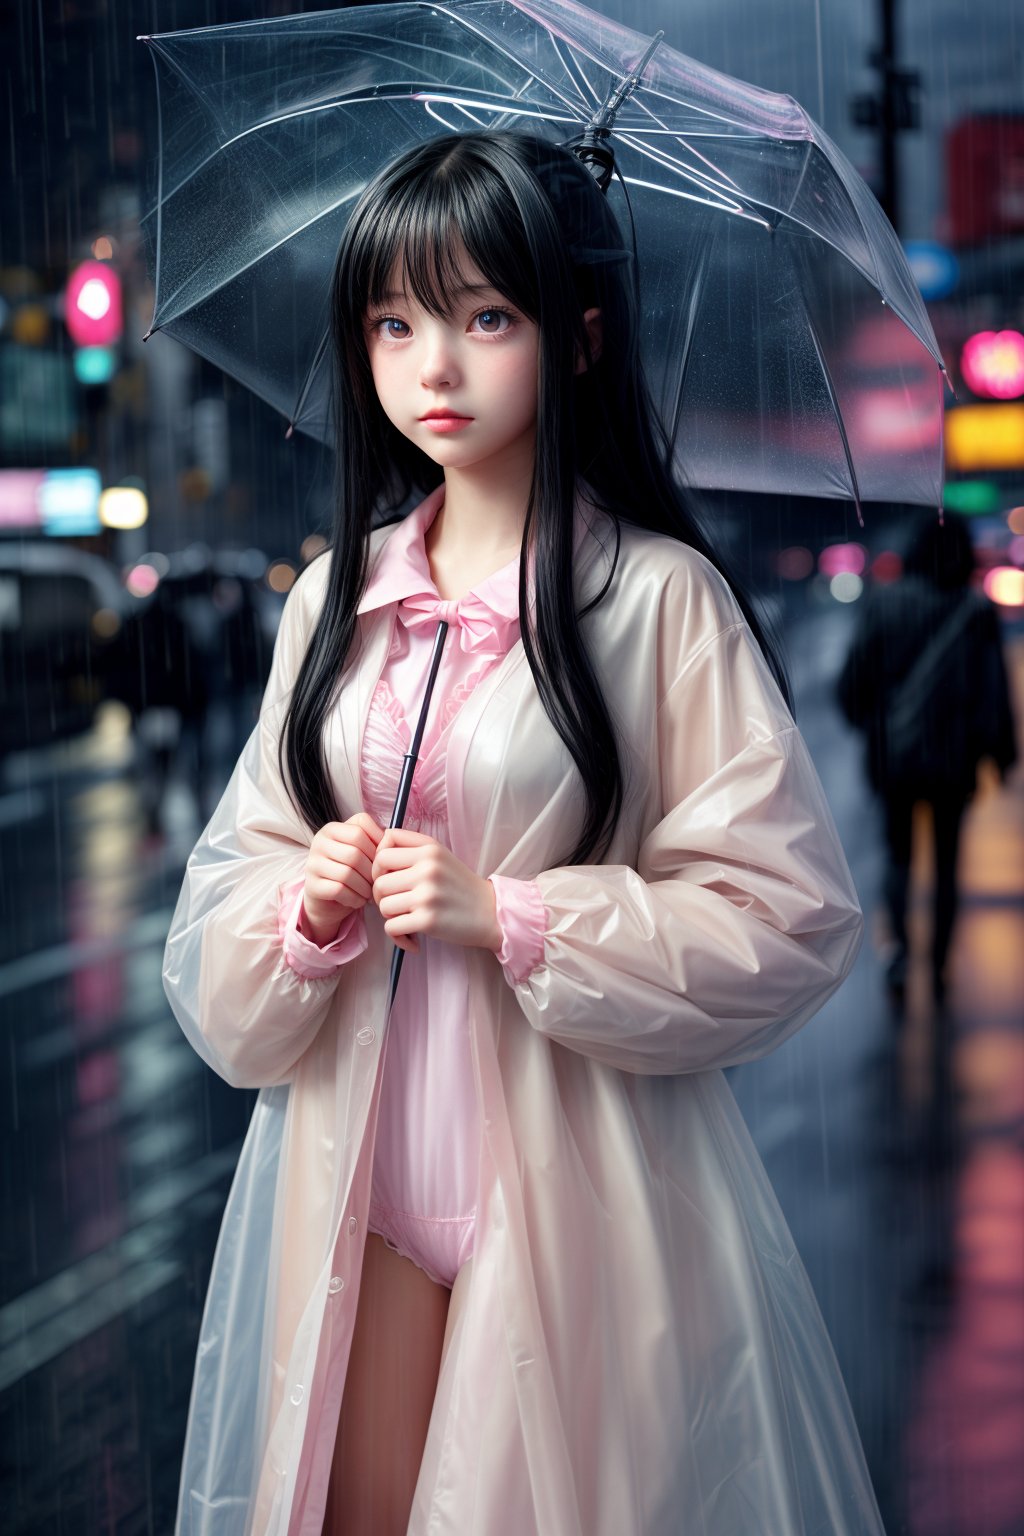 On a rainy night in the city, there was a lot of traffic. A girl with long black hair wearing a mask held up a transparent umbrella. She had exquisite facial features, bright eyes, and a perfect figure. She only wore an open raincoat to reveal her delicate figure. nipples, big breasts. Pink nipples. Delicate bangs